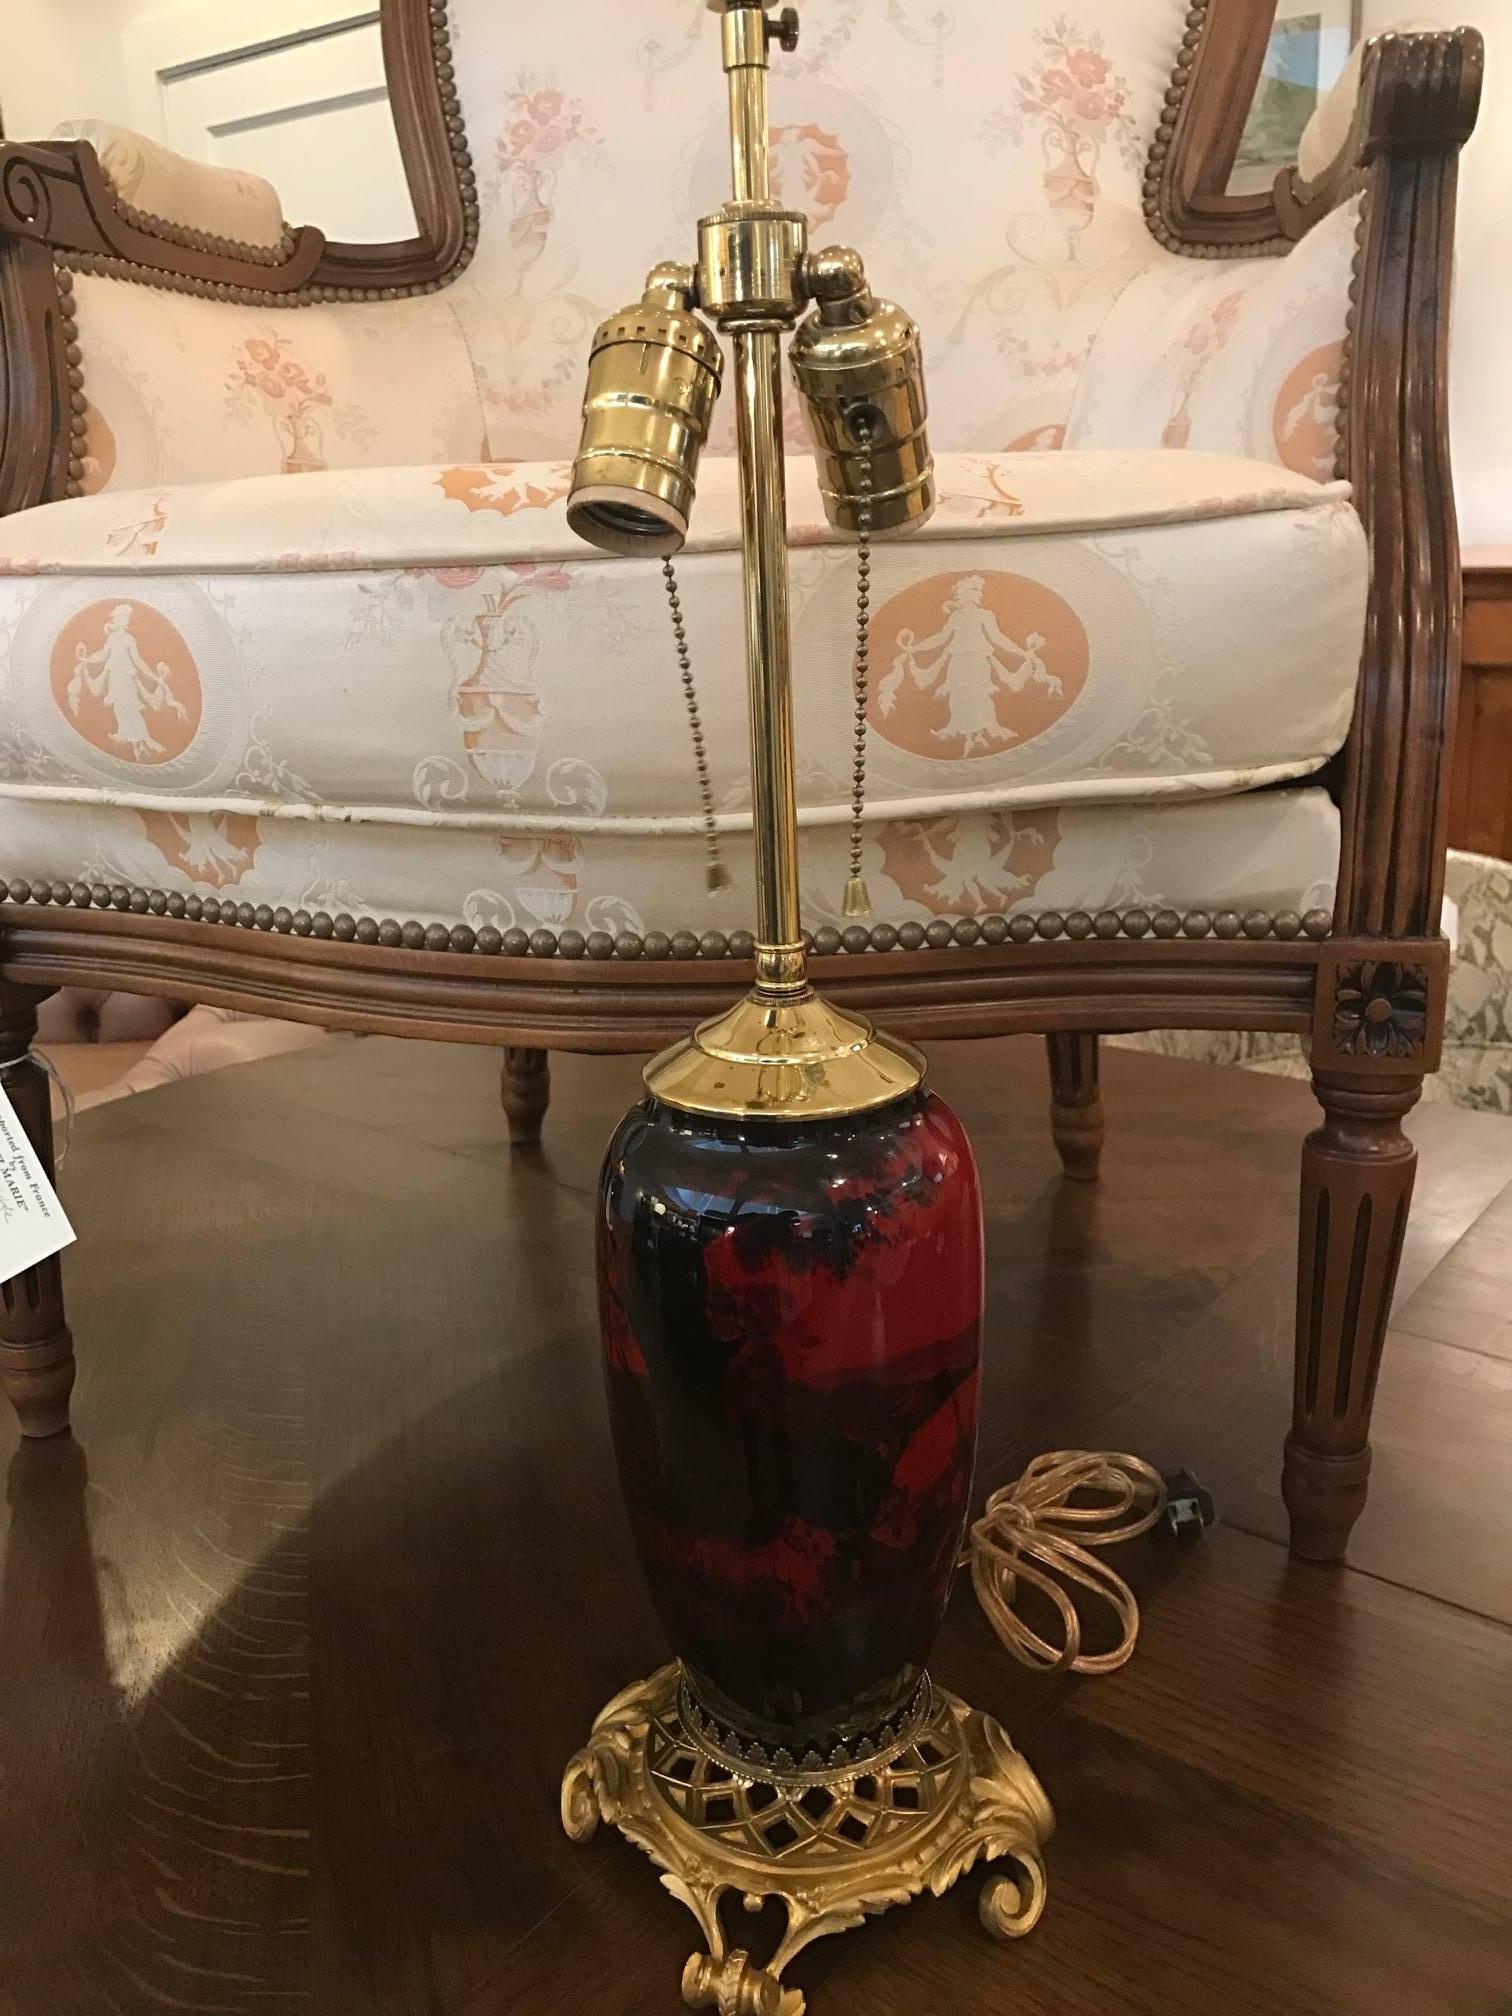 Exceptional pair of English flambe glazed ormolu-mounted lamps. Made by Royal Doulton in the early 20th century, these rich red glazed lamps are hand-painted by Charles Noke of the Royal Doulton porcelain and pottery makes. The bases are elegantly